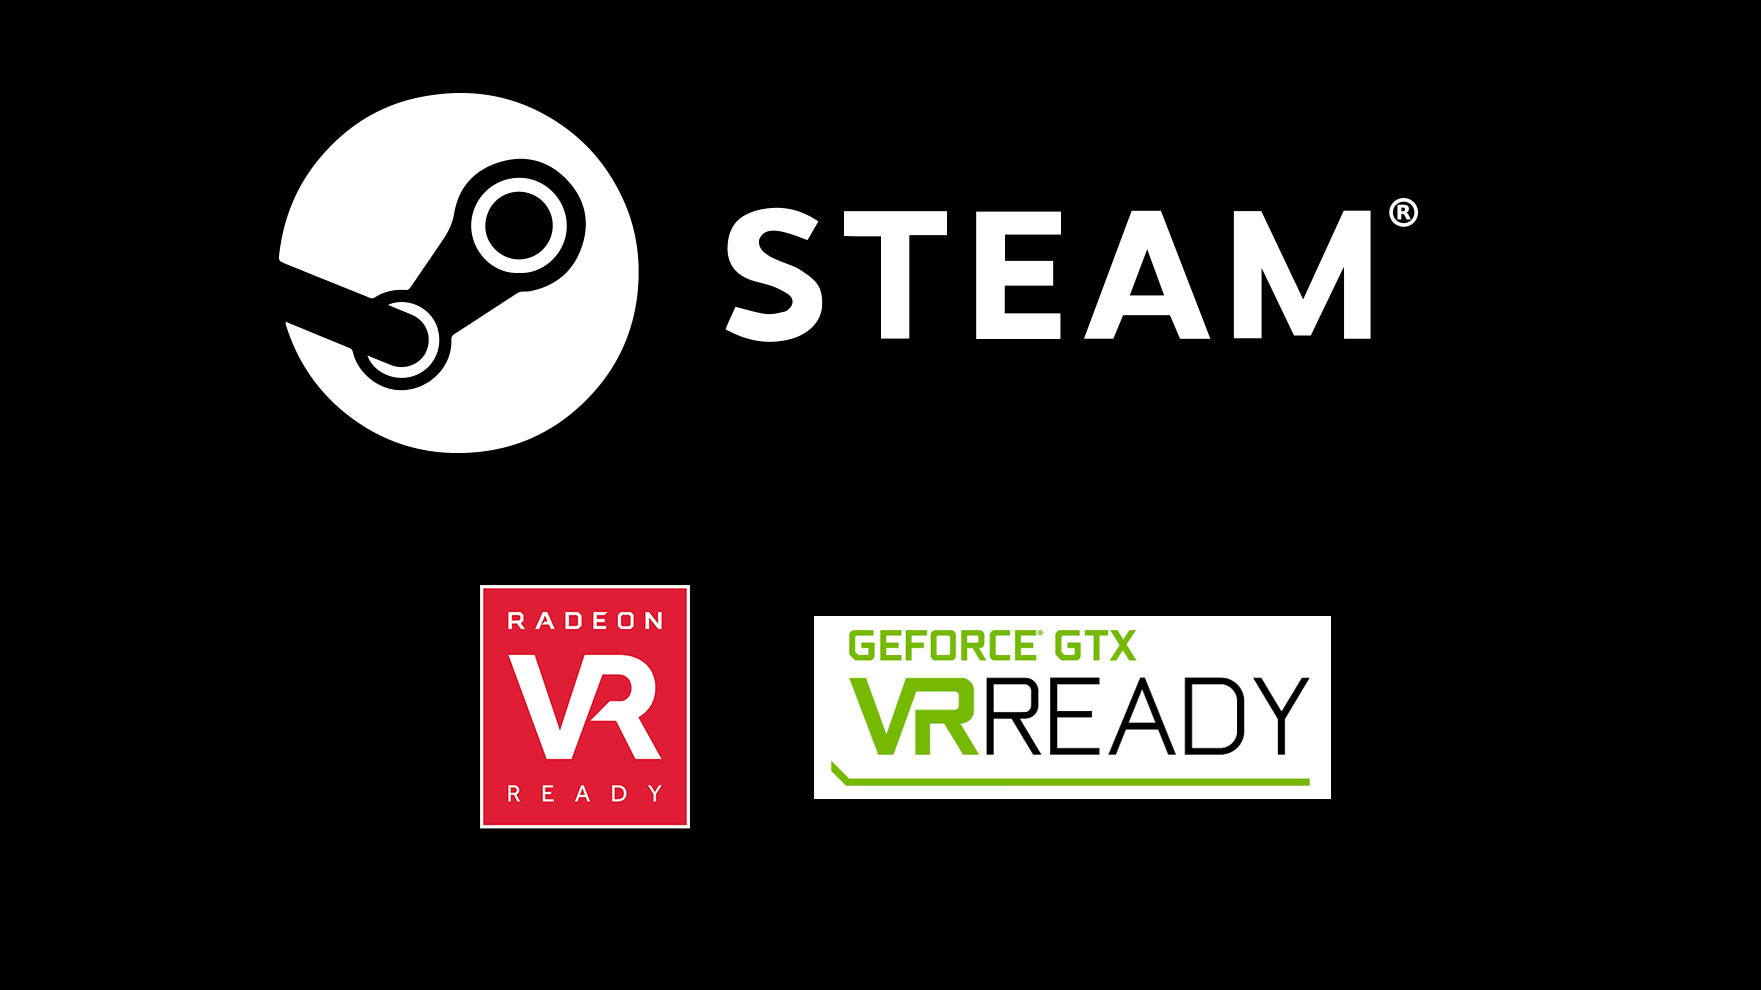 An Estimated 58 Million Steam Users Have VR Ready GPUs